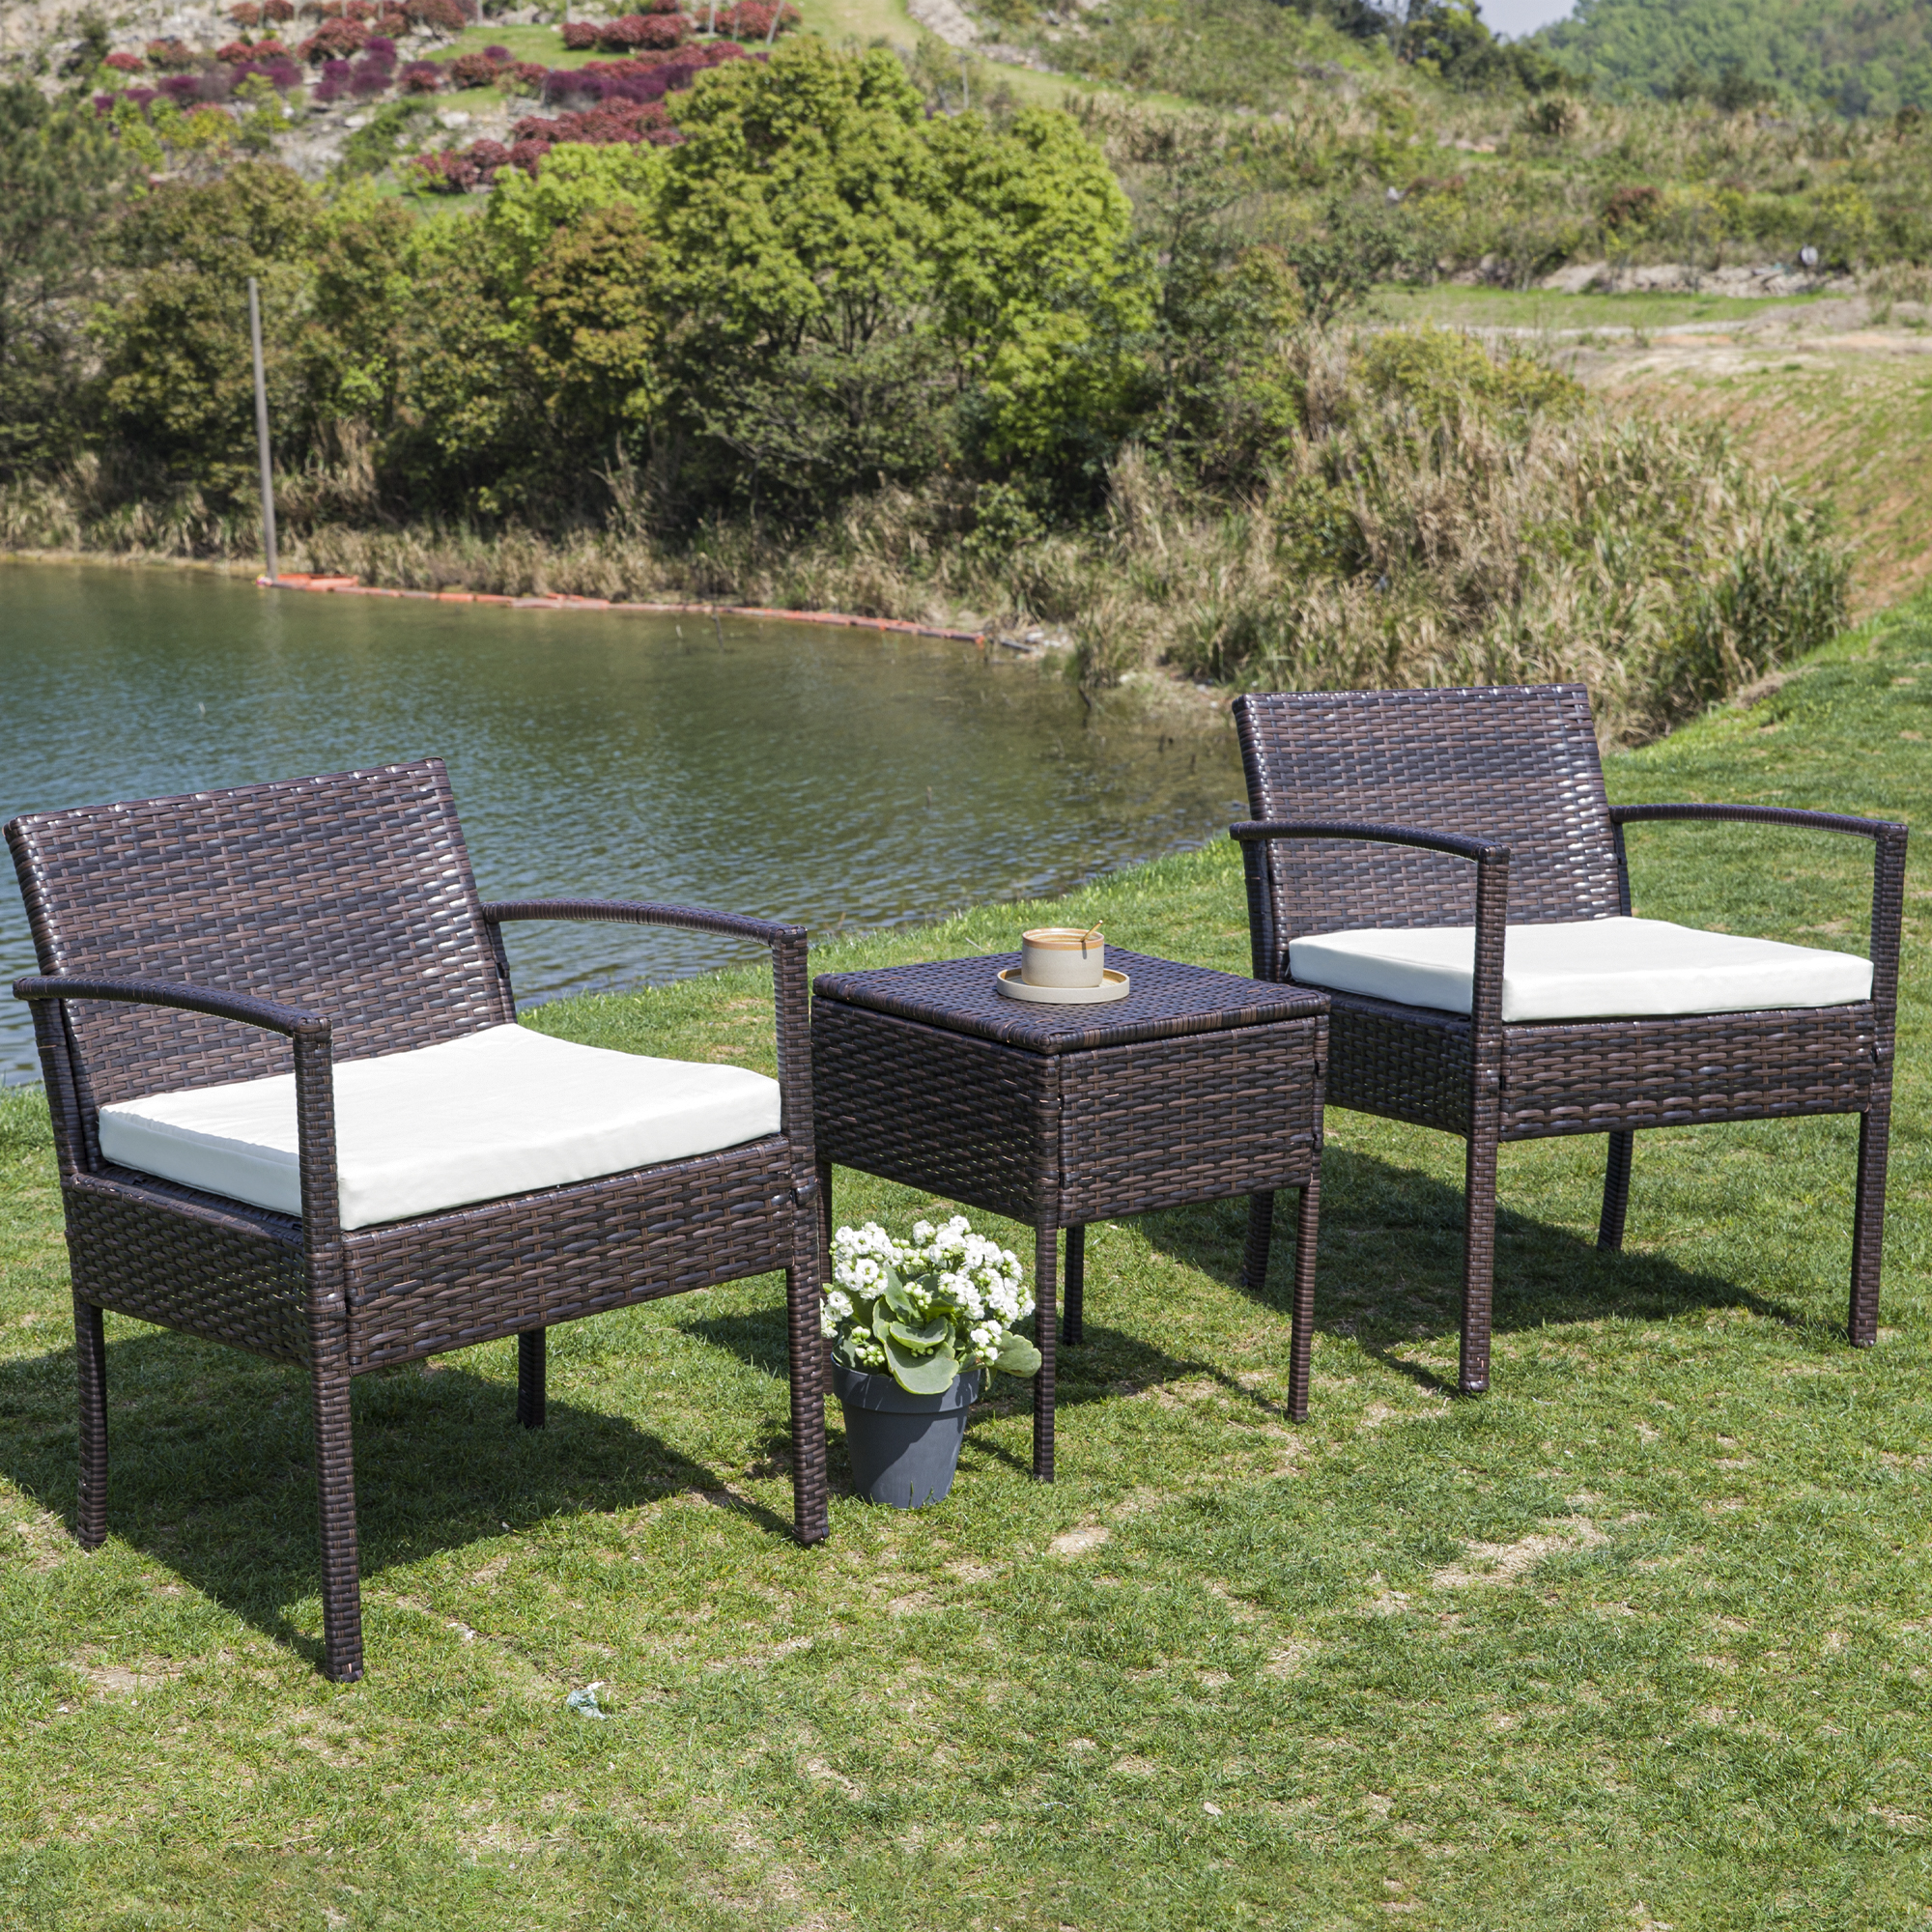 FHFO Patio Furniture Set Outdoor Furniture Outdoor Patio Furniture Set 3 Pieces Patio Conversation Set Table and Chairs with Cushions for Garden Balcony Backyard Porch Lawn Brown Rattan White Cushion - image 1 of 6